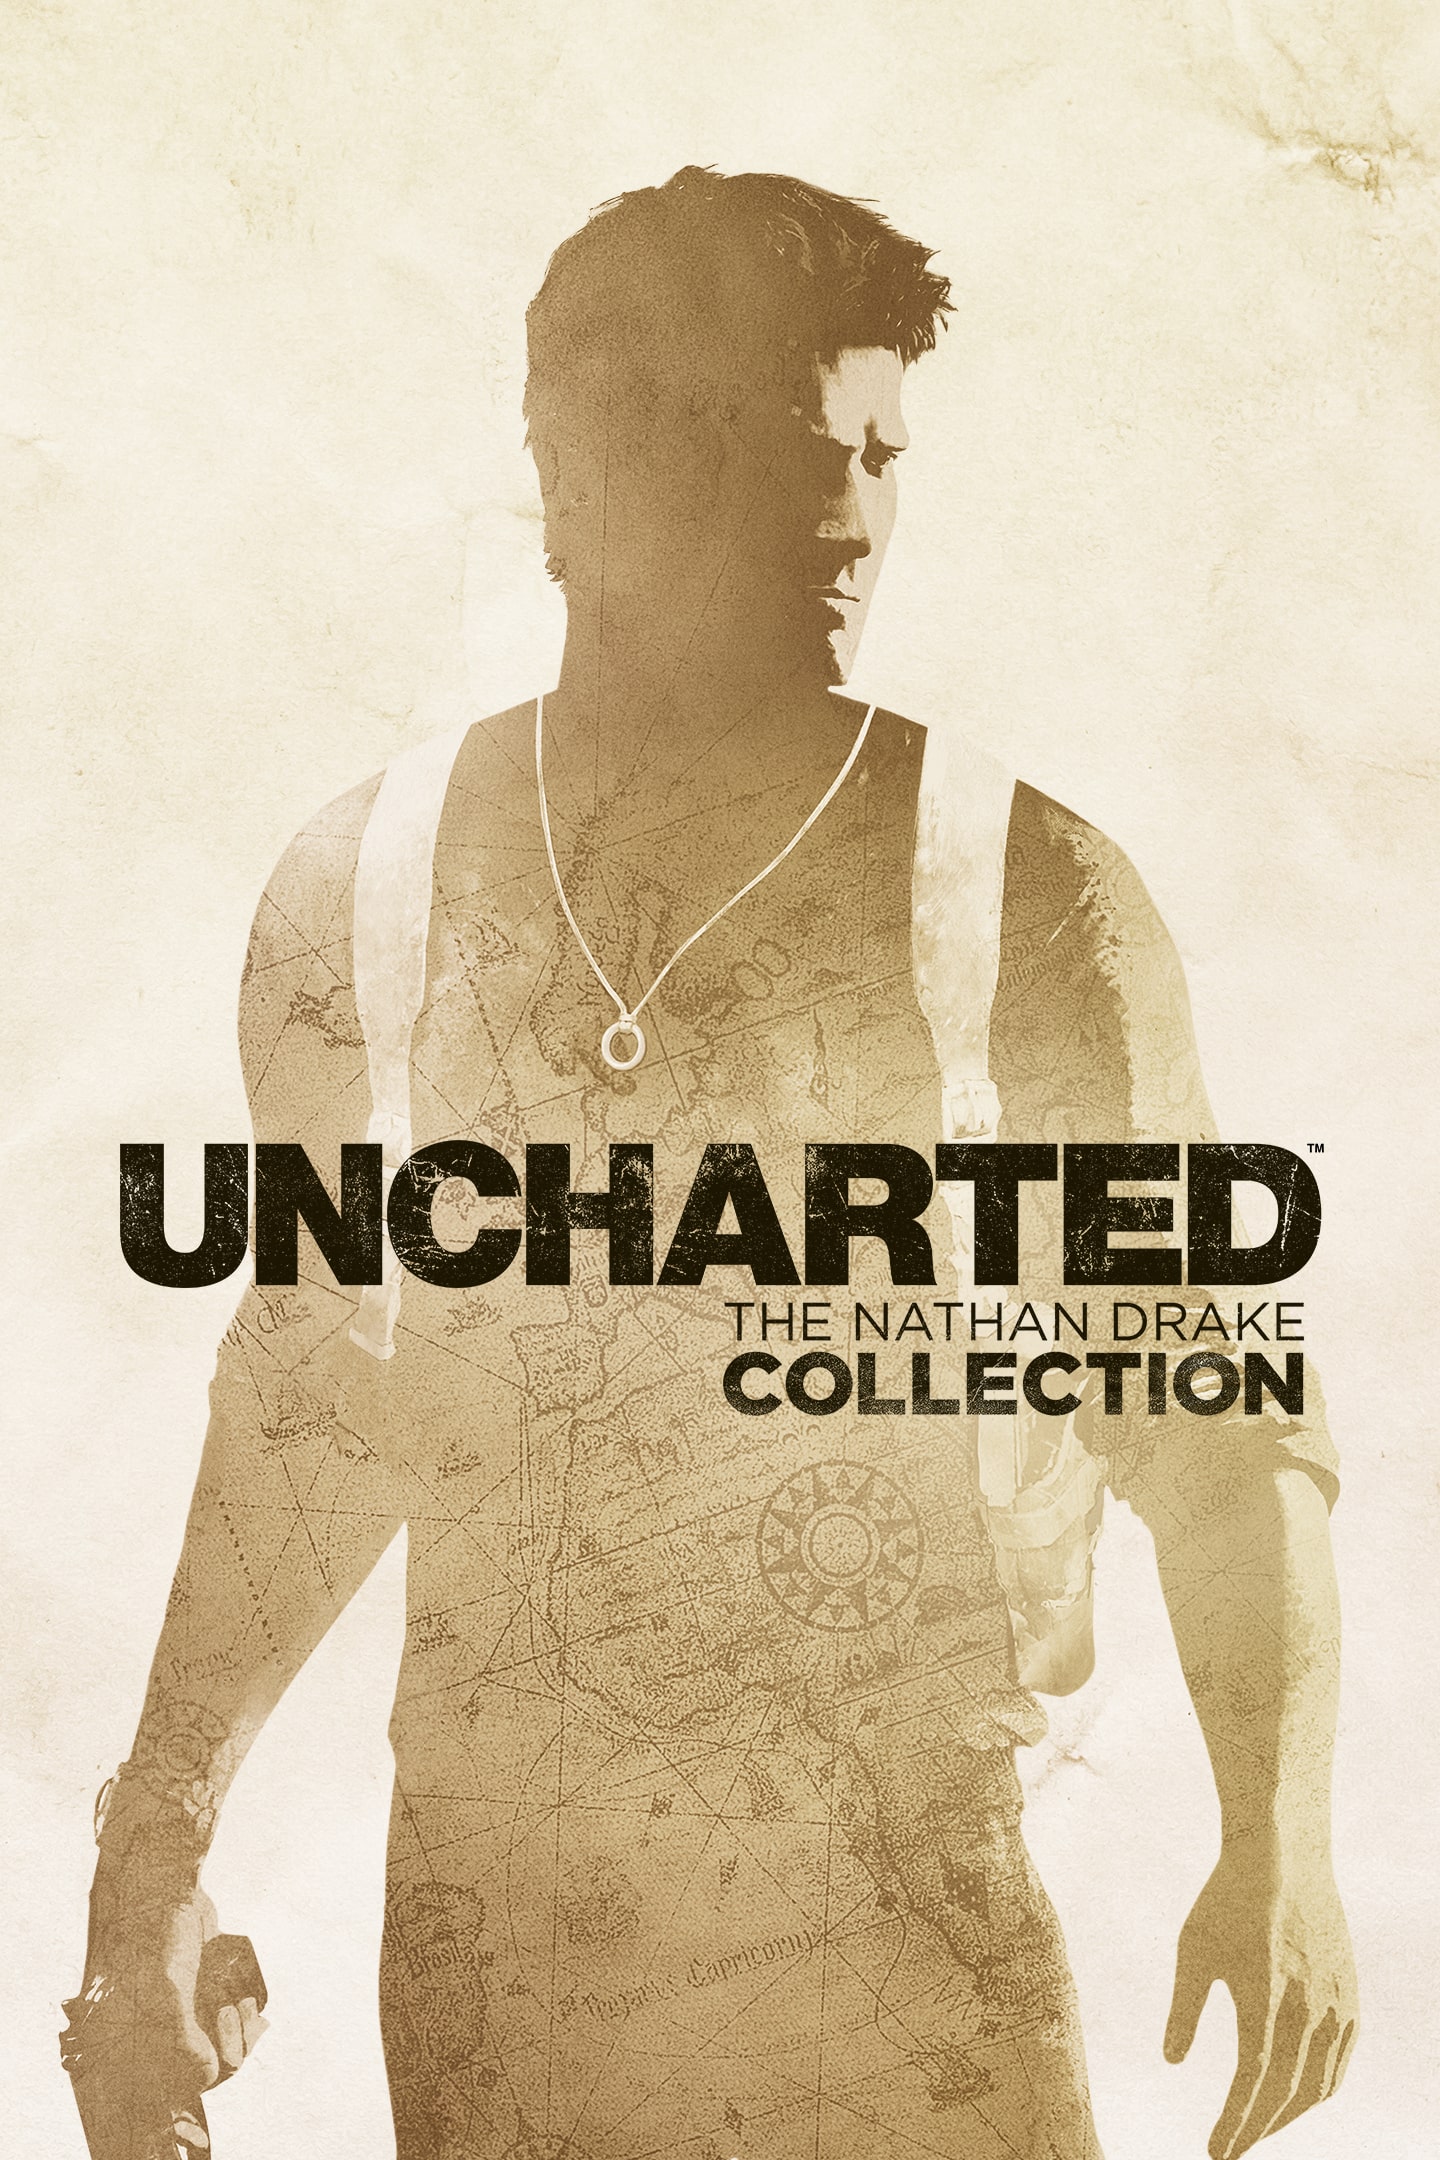 Uncharted: The Nathan Drake Collection official promotional image